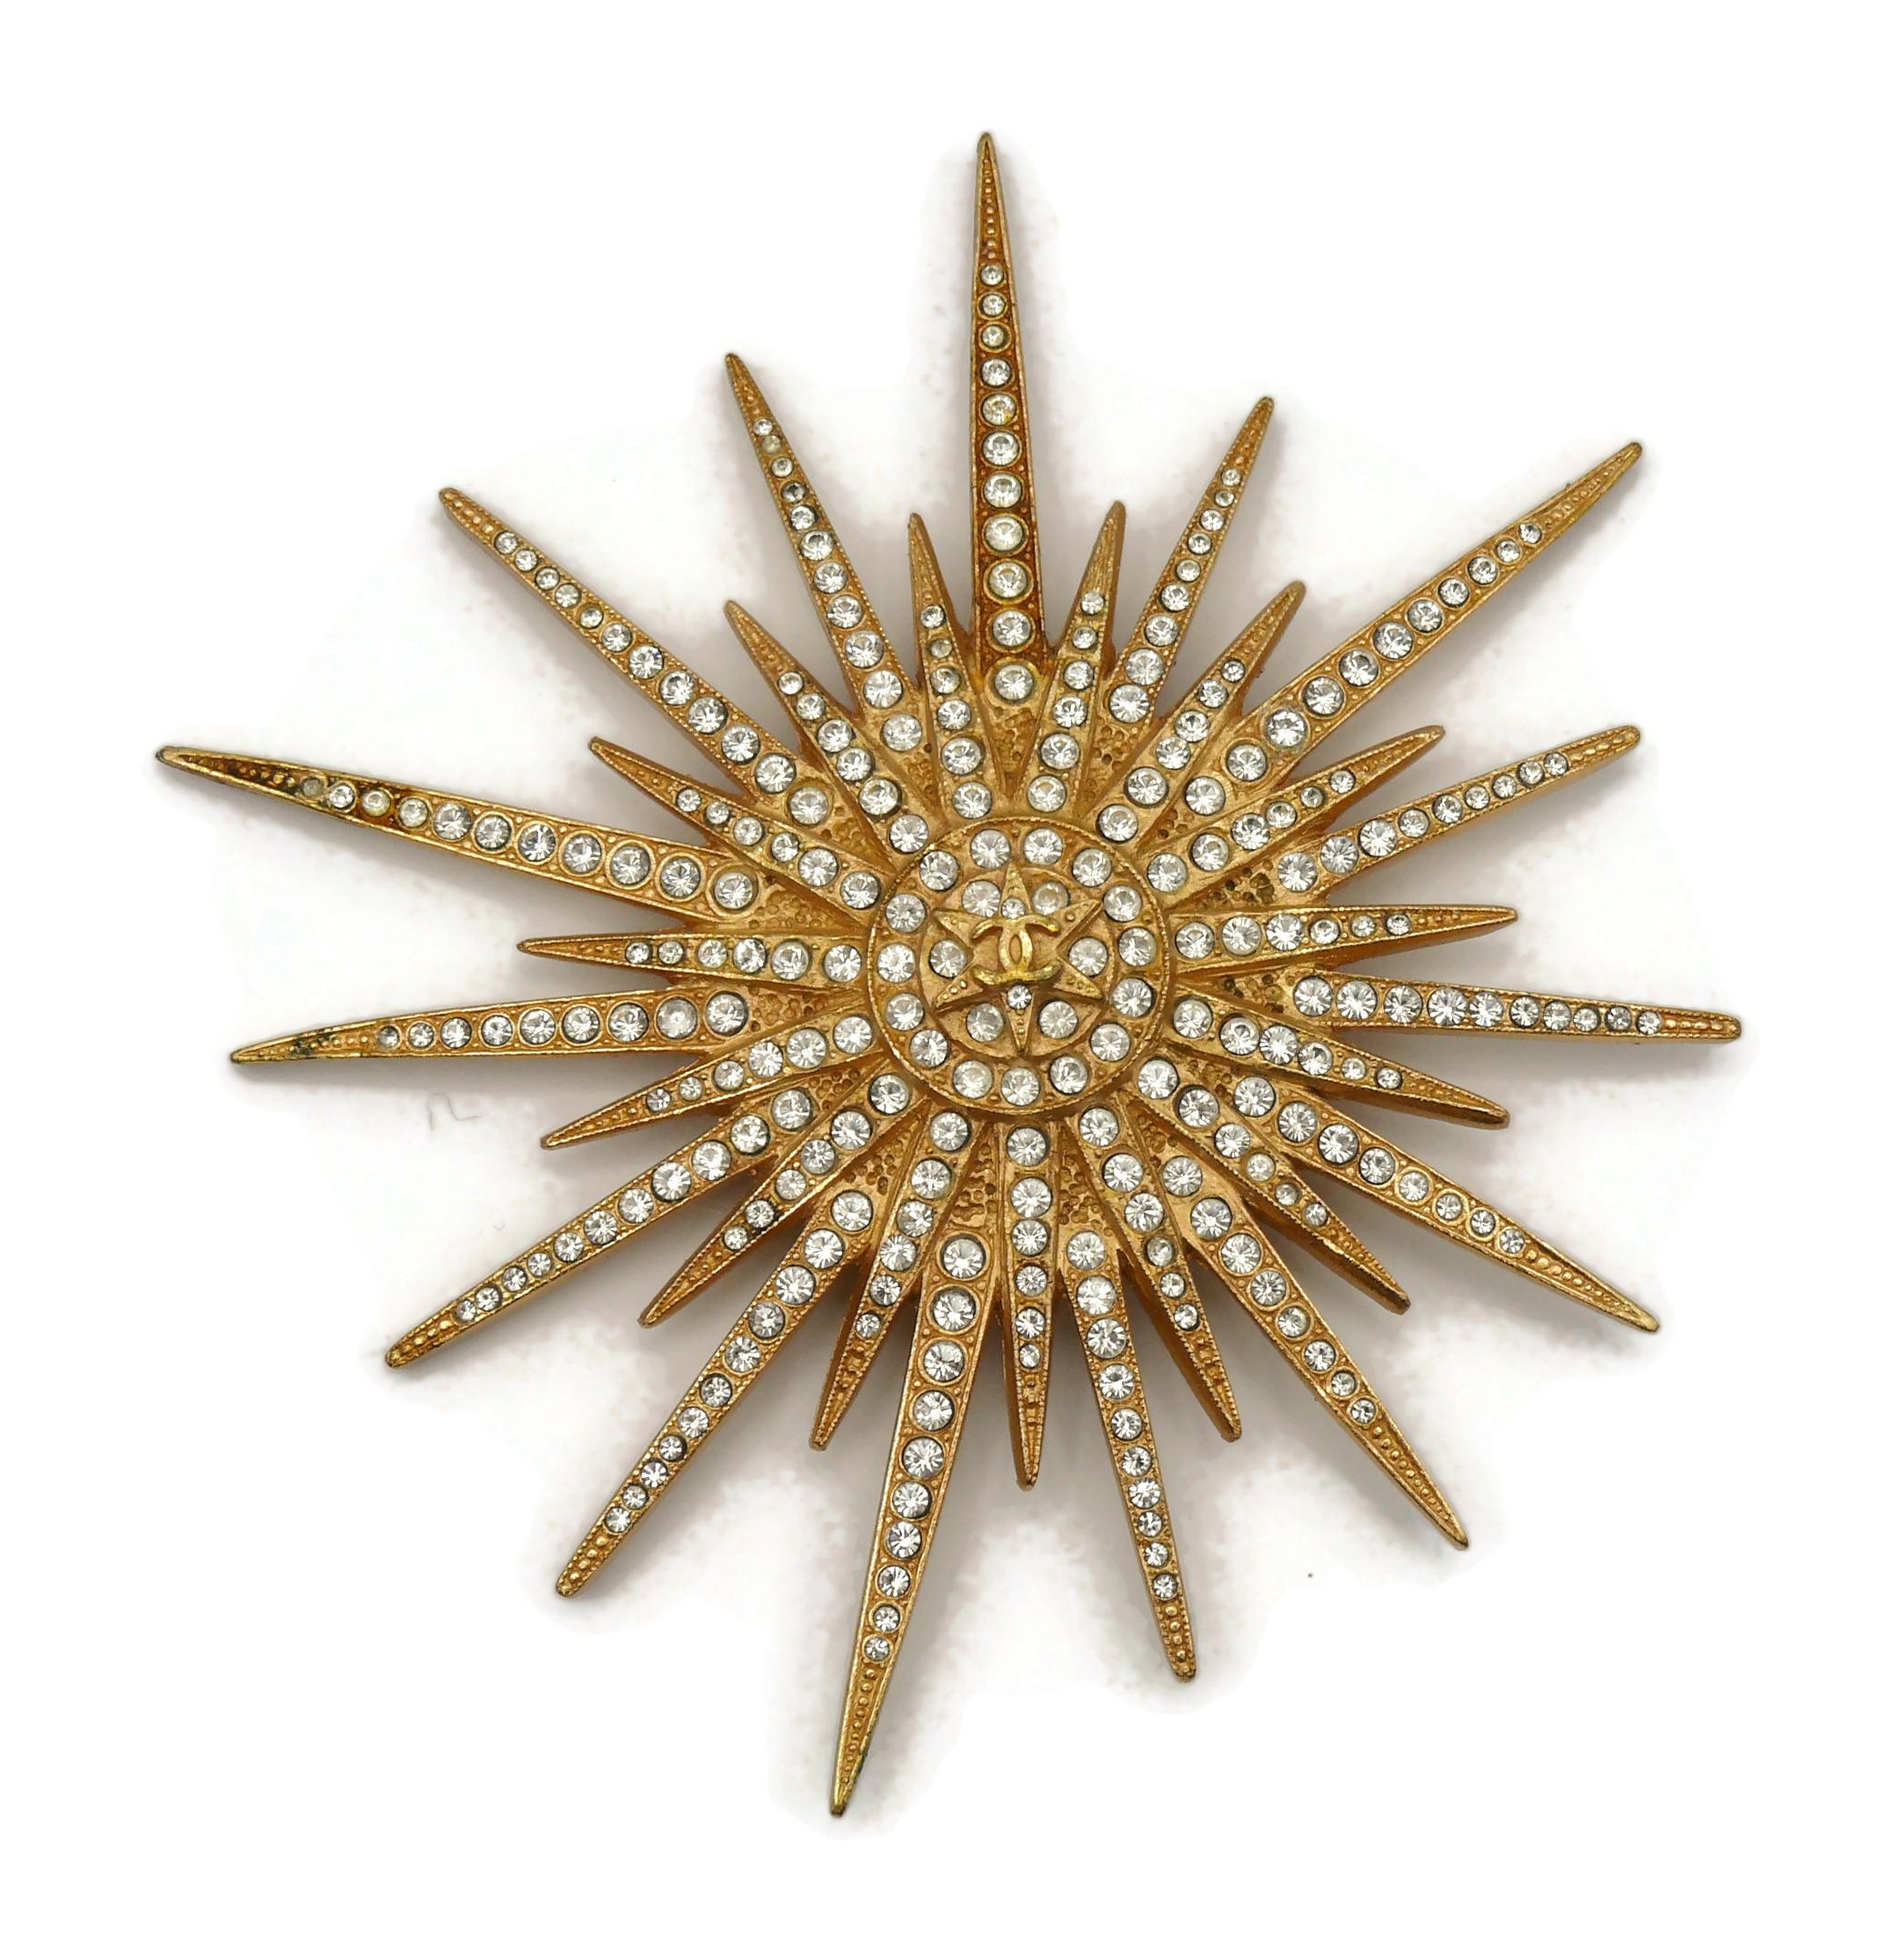 CHANEL by KARL LAGERFELD Vintage Jewelled Gold Tone Starbust Brooch, Spring 2001